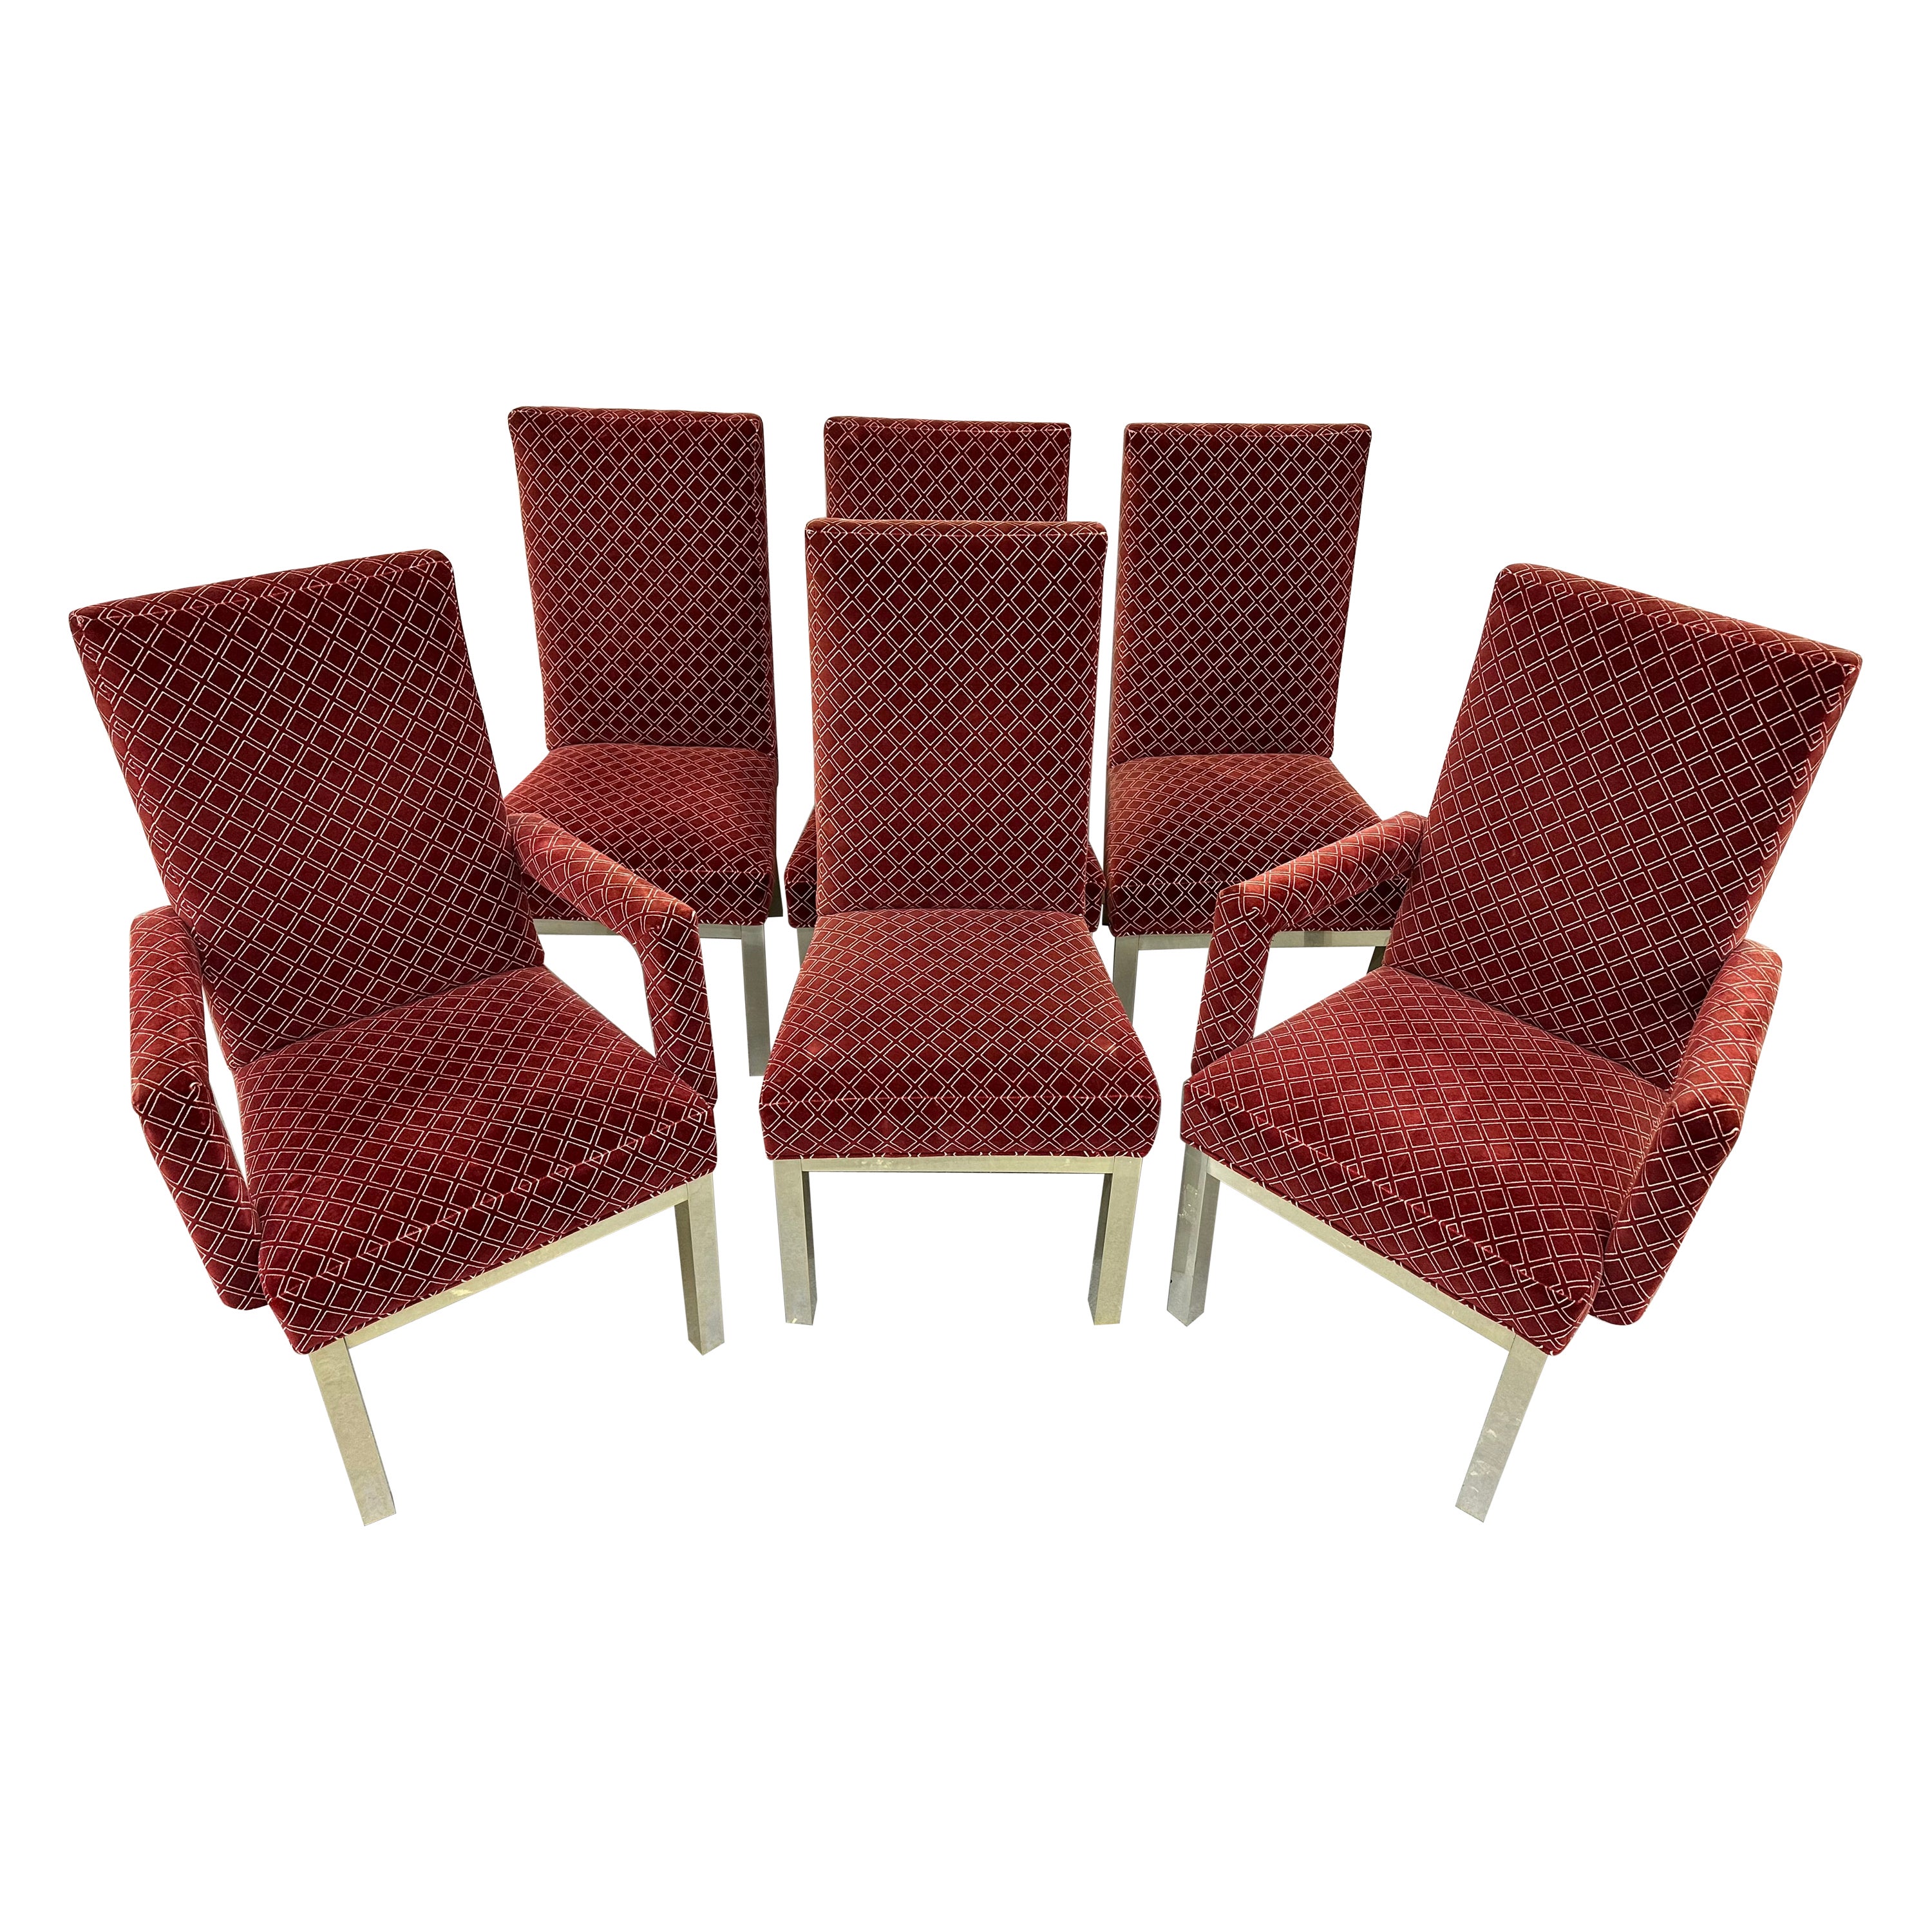 Vintage Milo Baughman Style Upholstered Dining Chairs - Set of 6